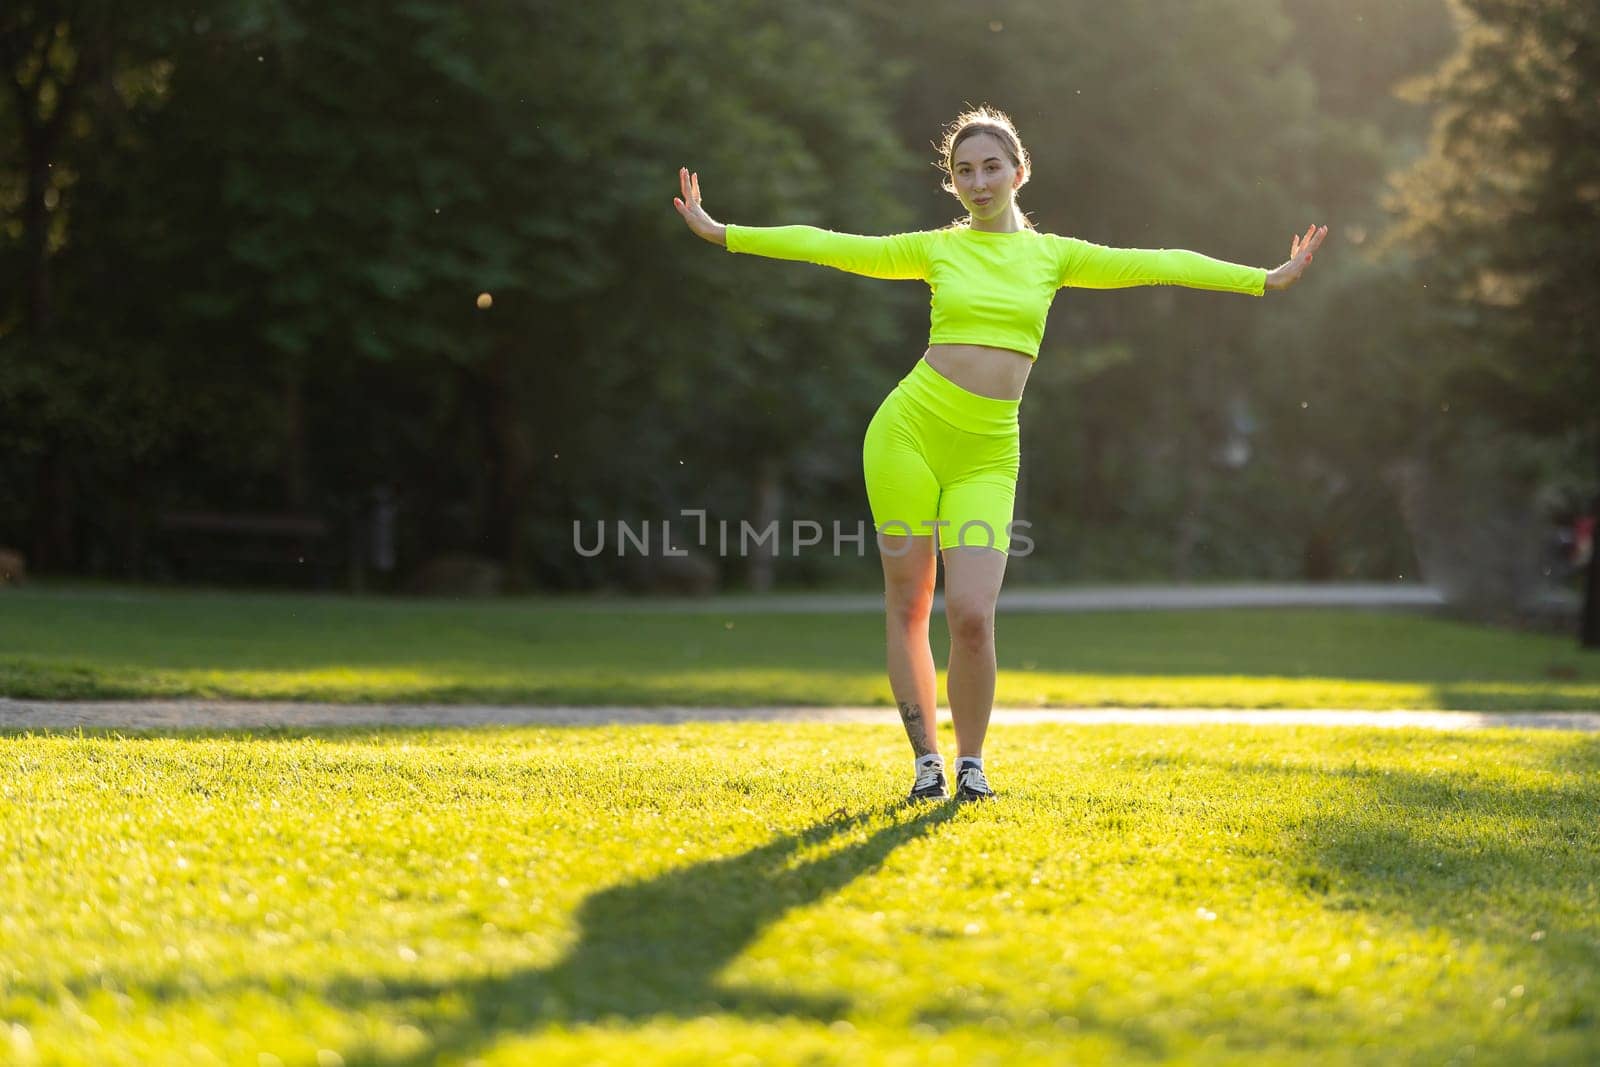 A woman in neon green is standing in a field of grass. She is wearing a neon green top and shorts